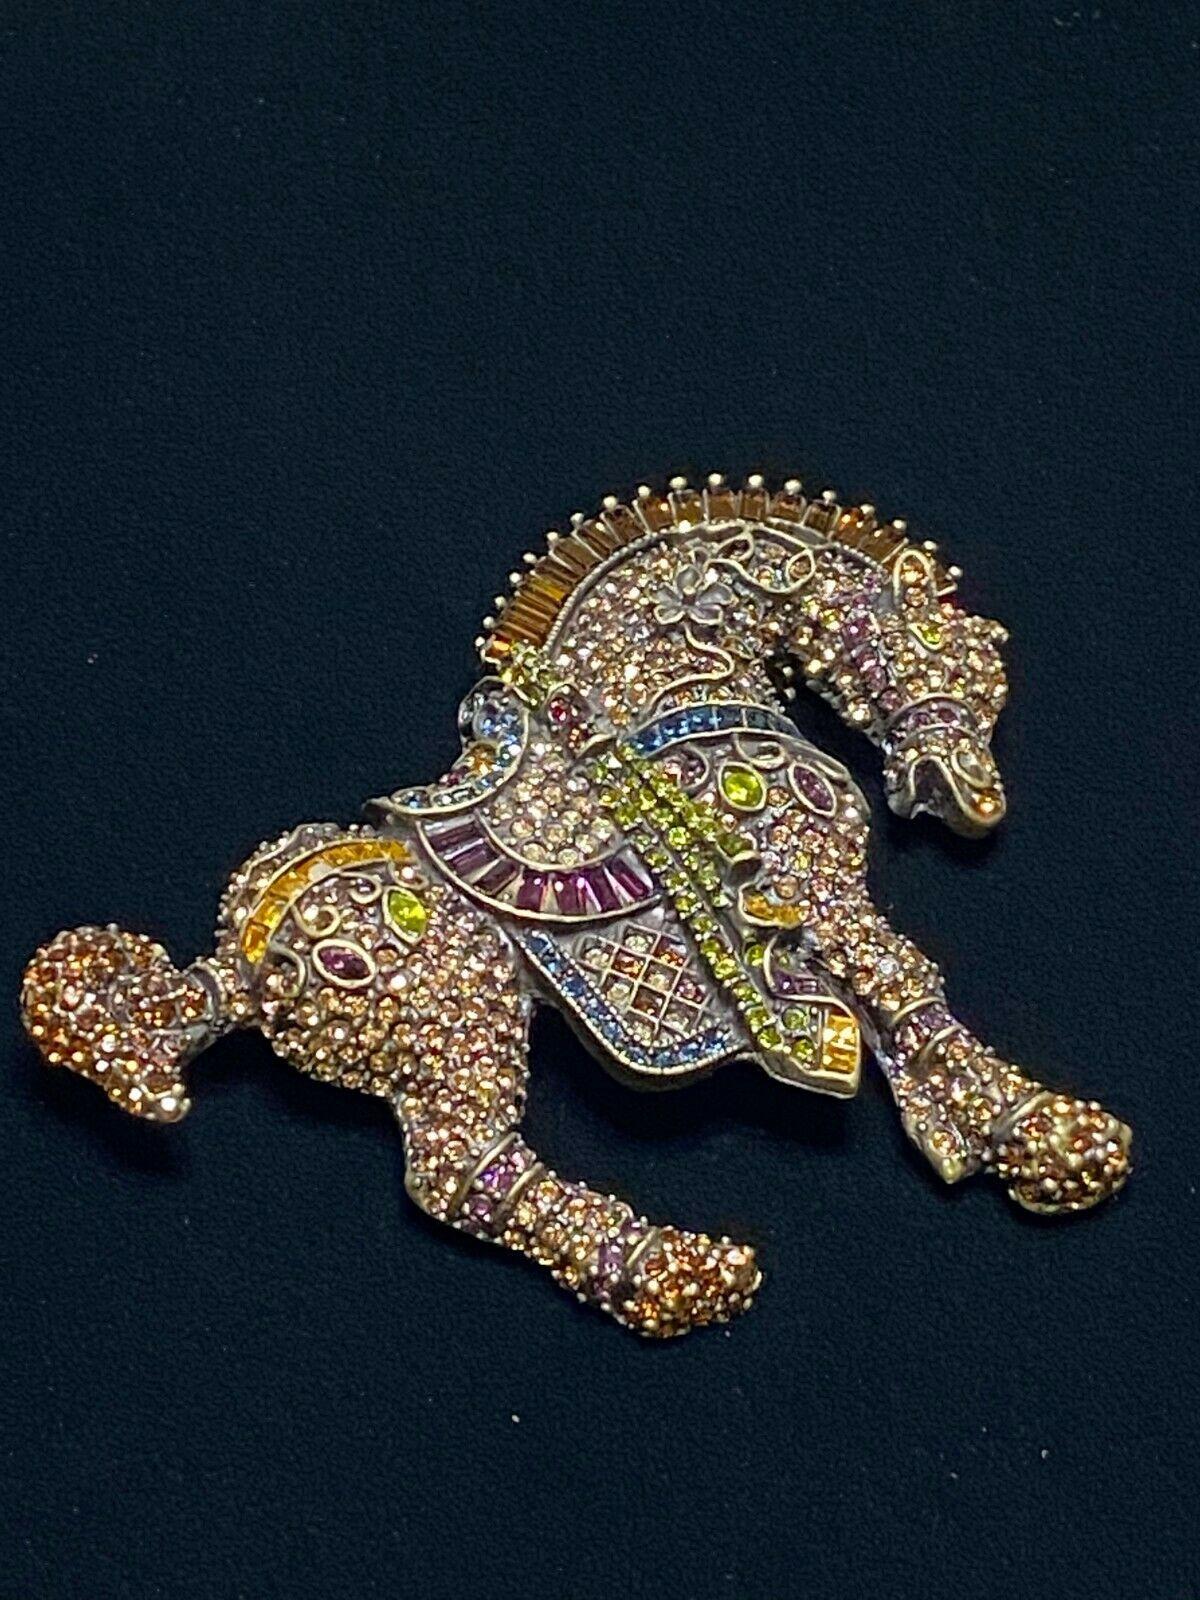 Chic and Dramatic Bowing Show Horse design Equestrian brooch encrusted with  pave-set sparkling multicolored crystals. Fancy saddle and decorative accents feature square, marquise and baguette crystals; mane composed of prong-set crystal baguettes.